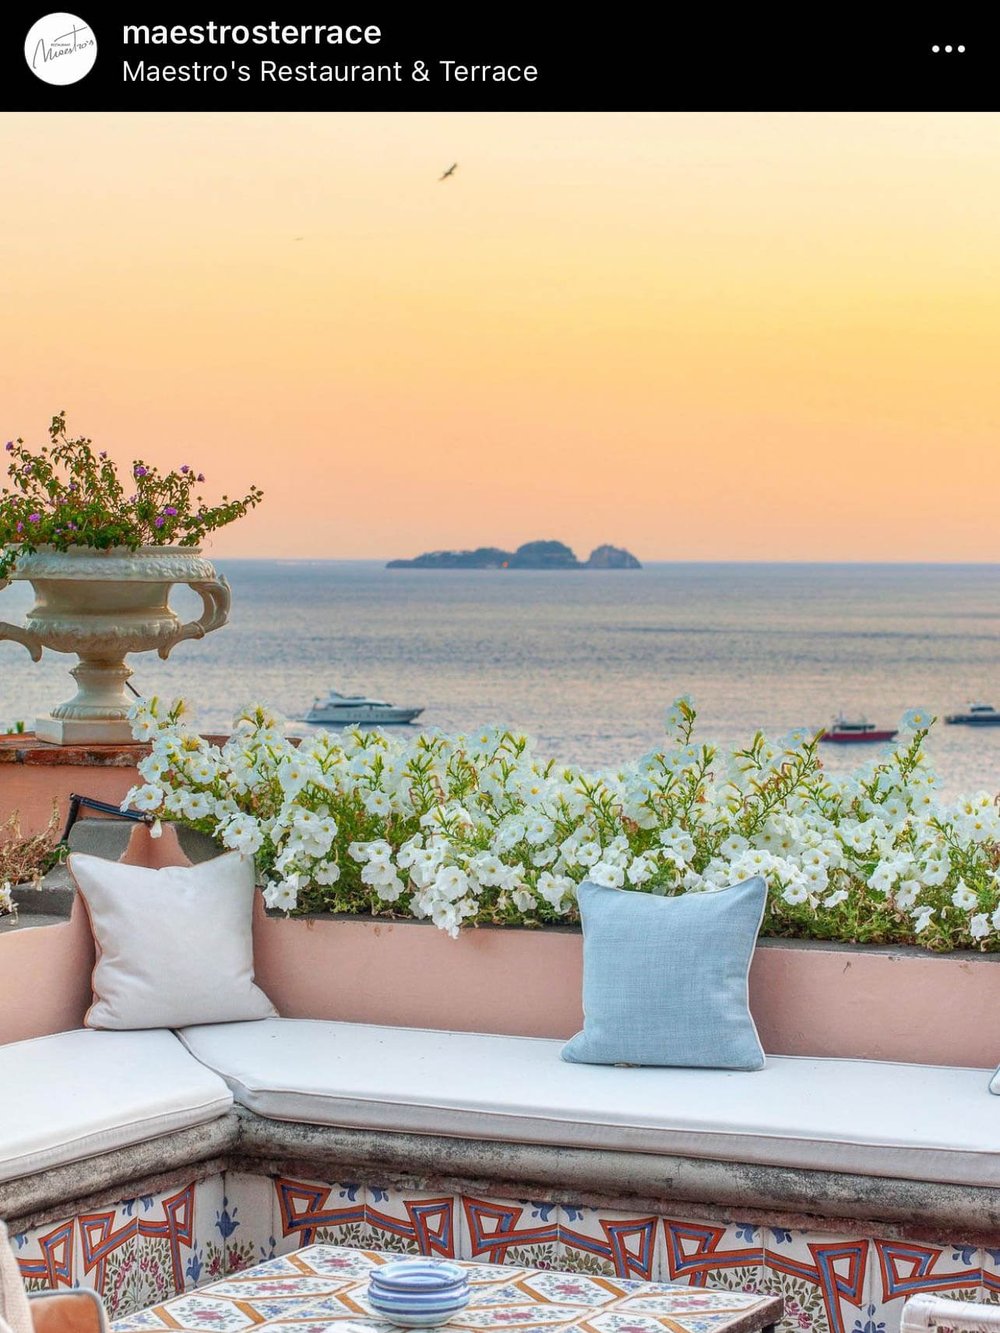 Sunset views of the sea in Positano from Maestro, one of the best restaurants in Positano